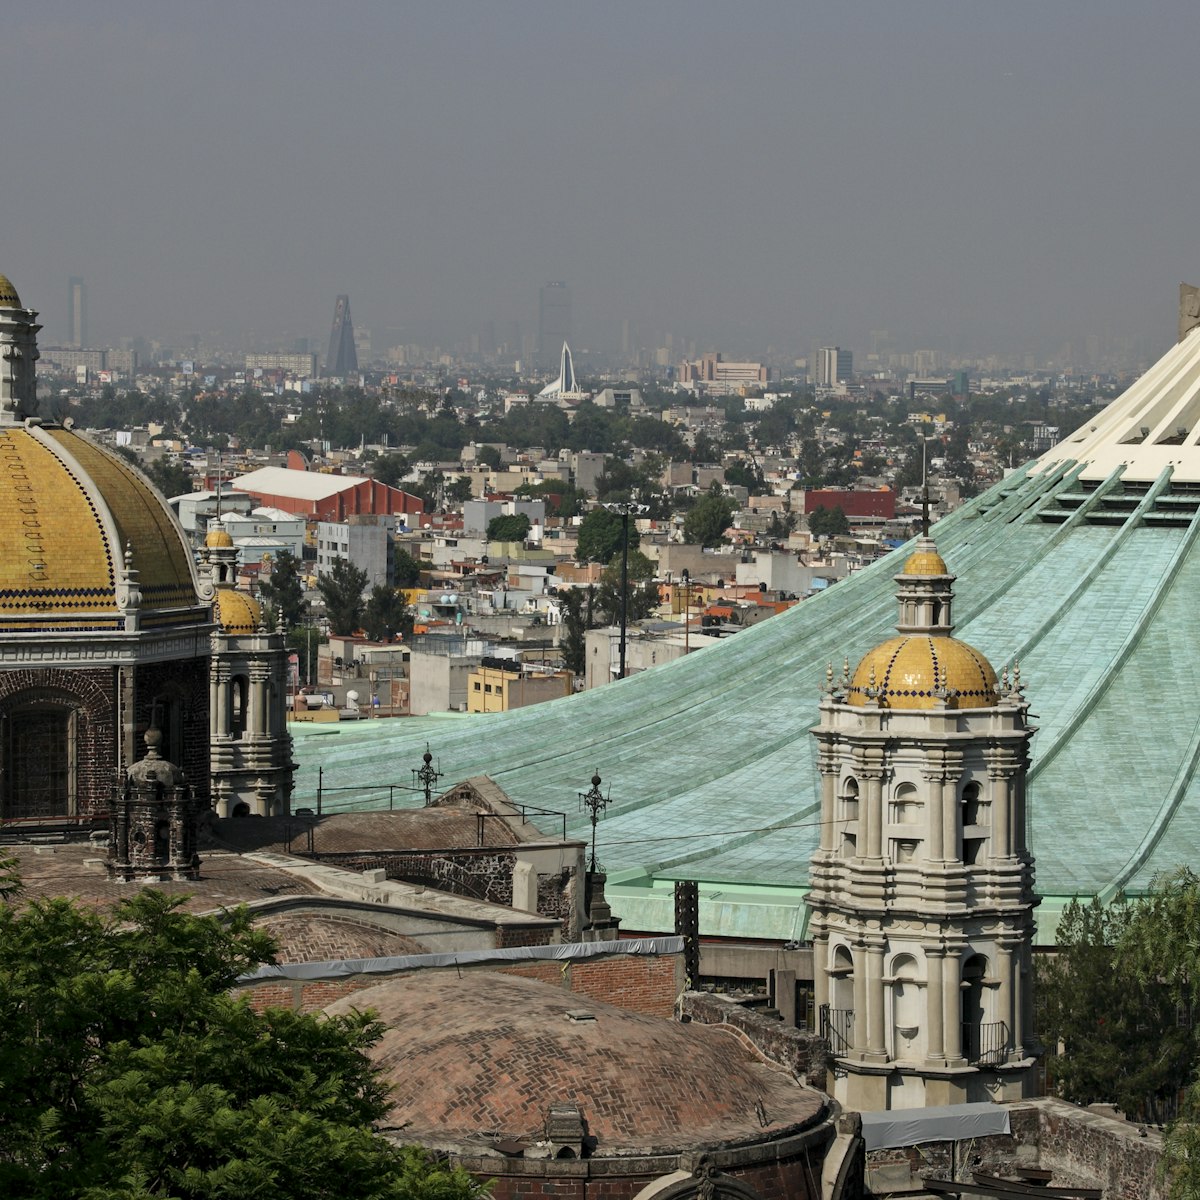 Mexico, Mexico City. The Basilica of Guadalupe, considered to be the second most important sanctuary of Catholicism after the Vatican City.